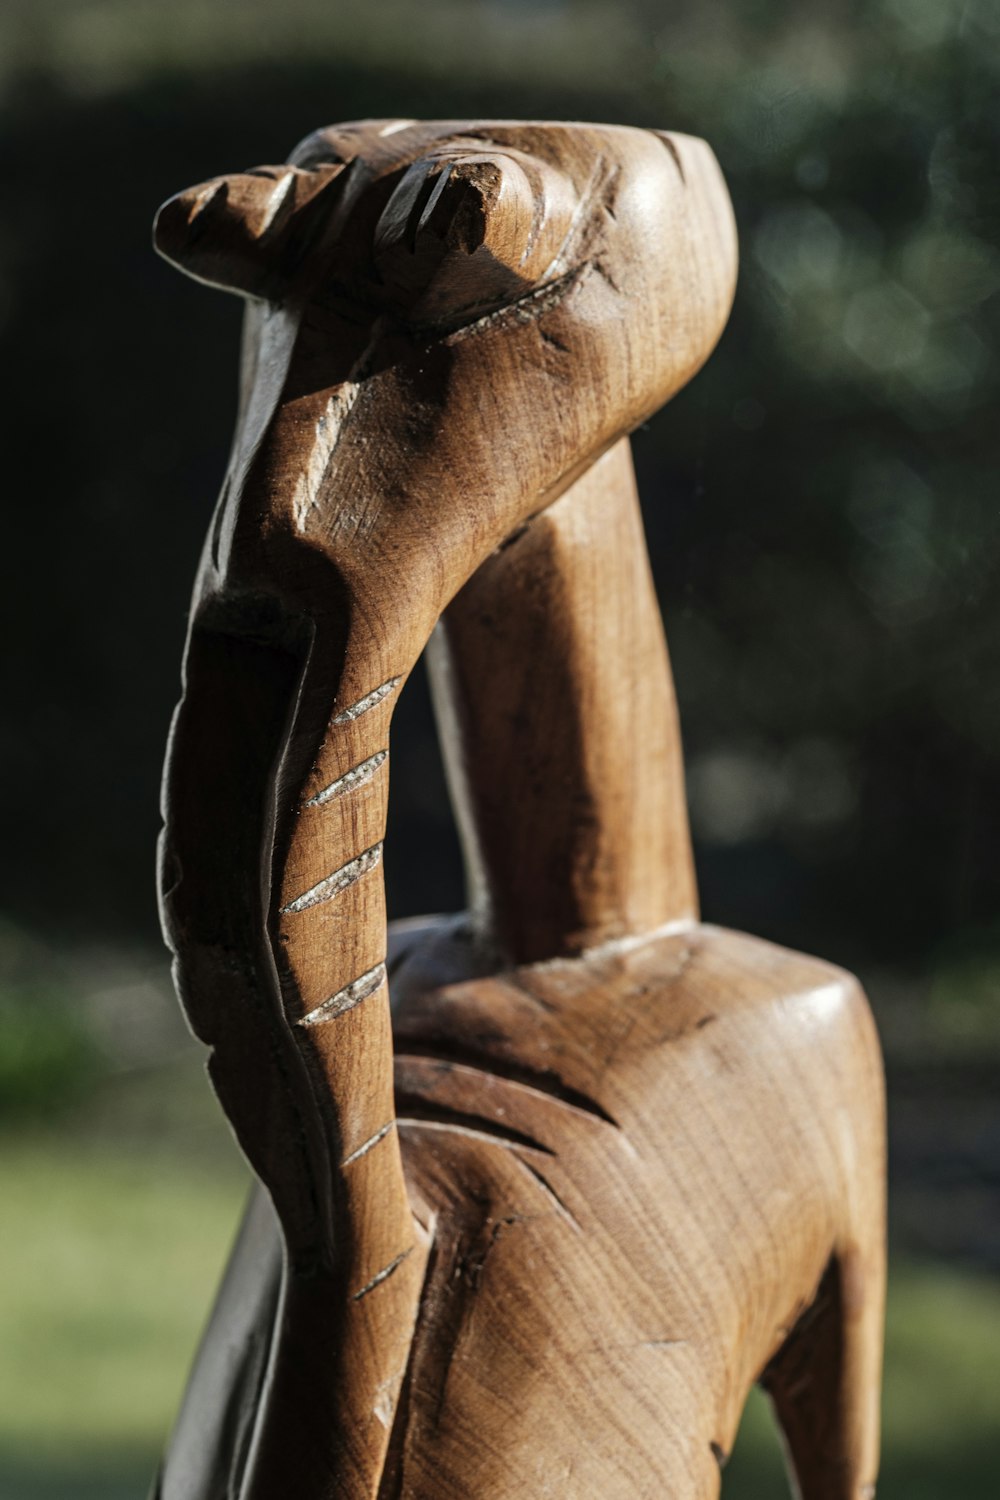 a wooden statue of a person with a hand on his head